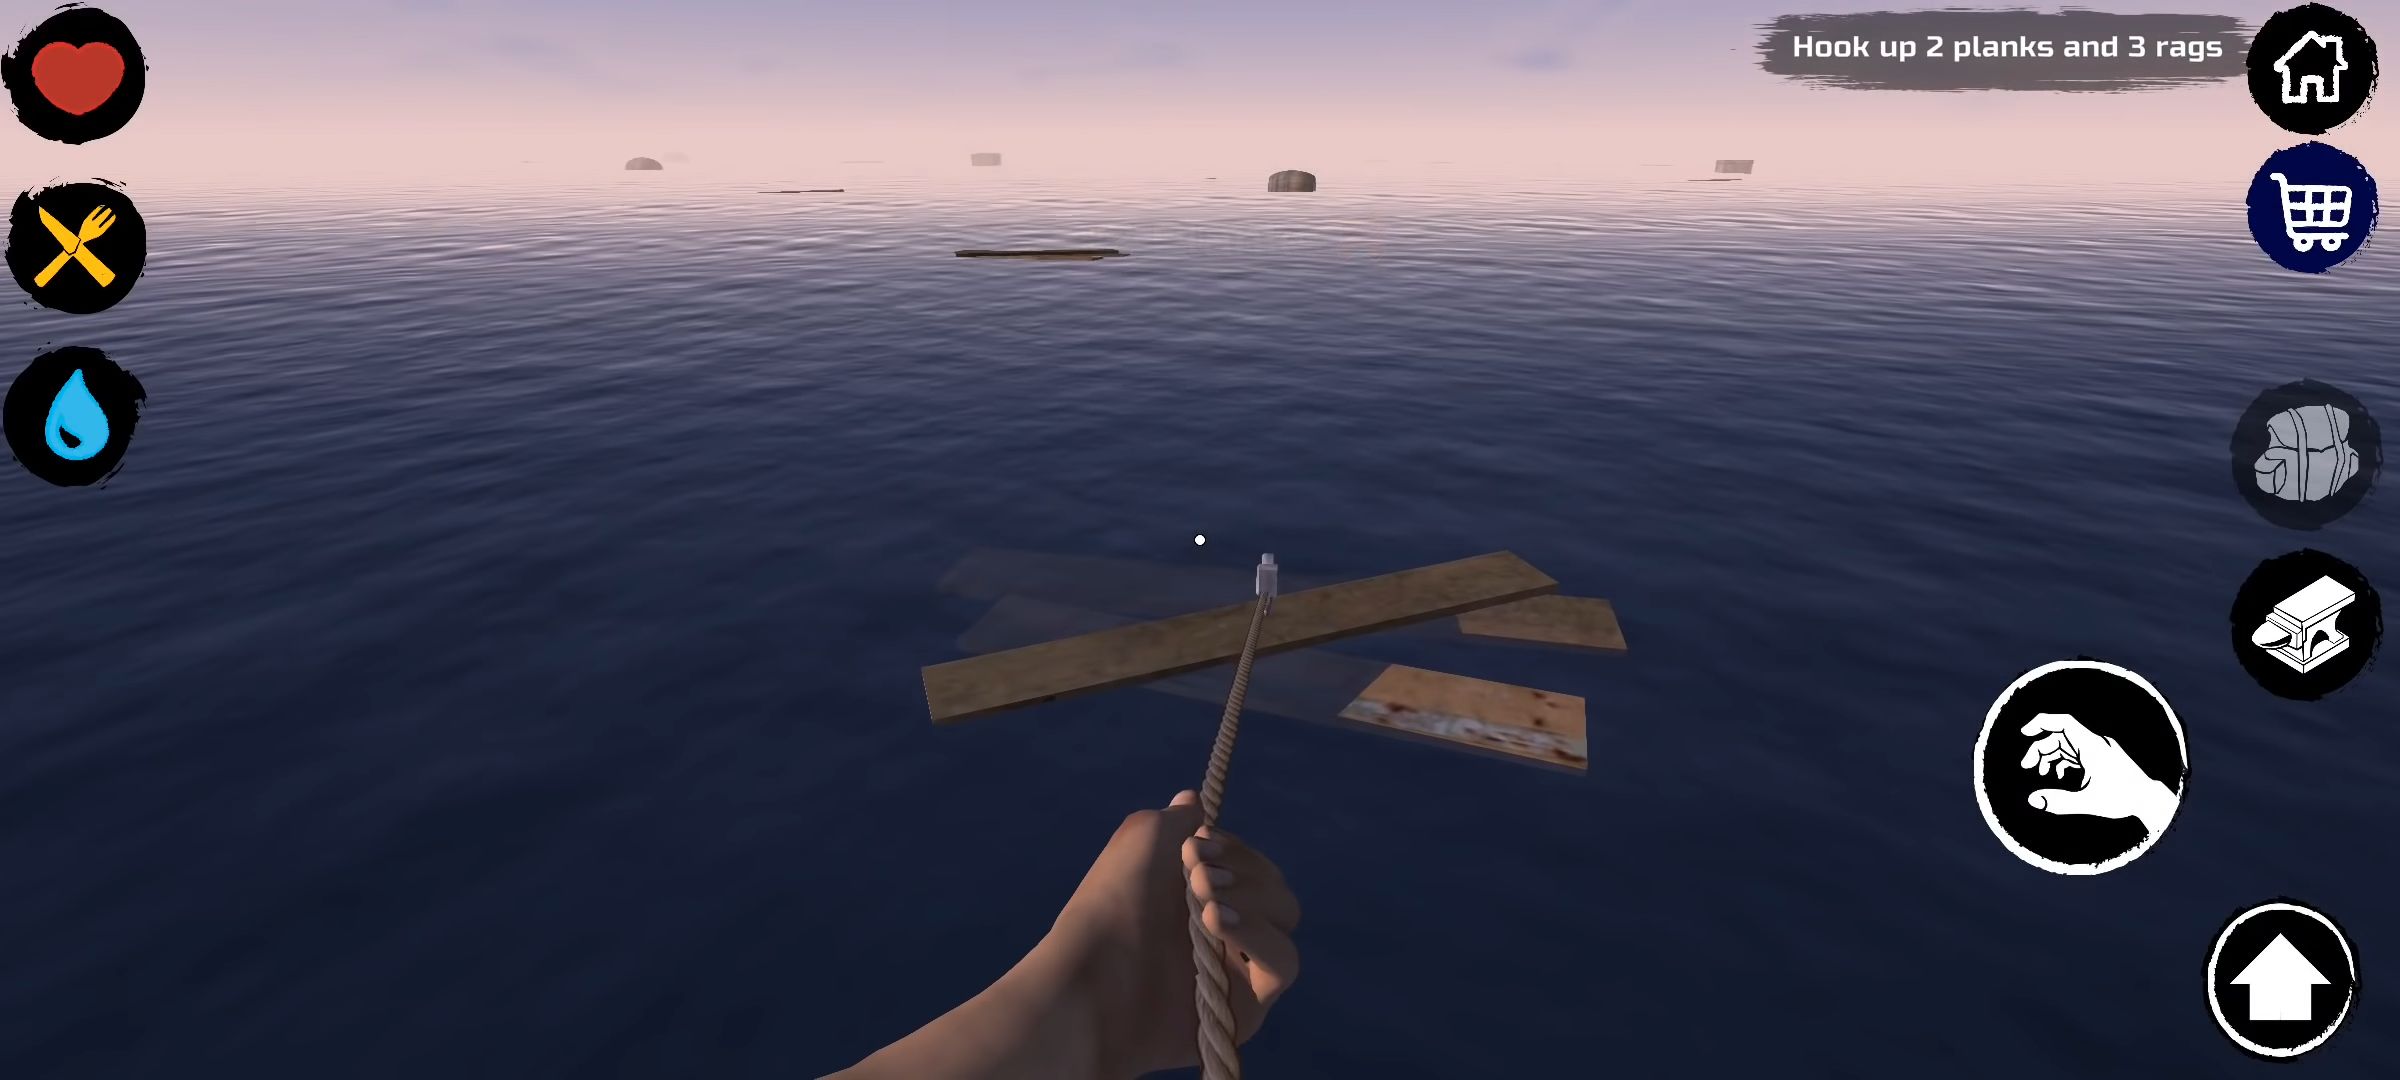 Scarica Survival and Craft: Crafting In The Ocean gratis per Android.